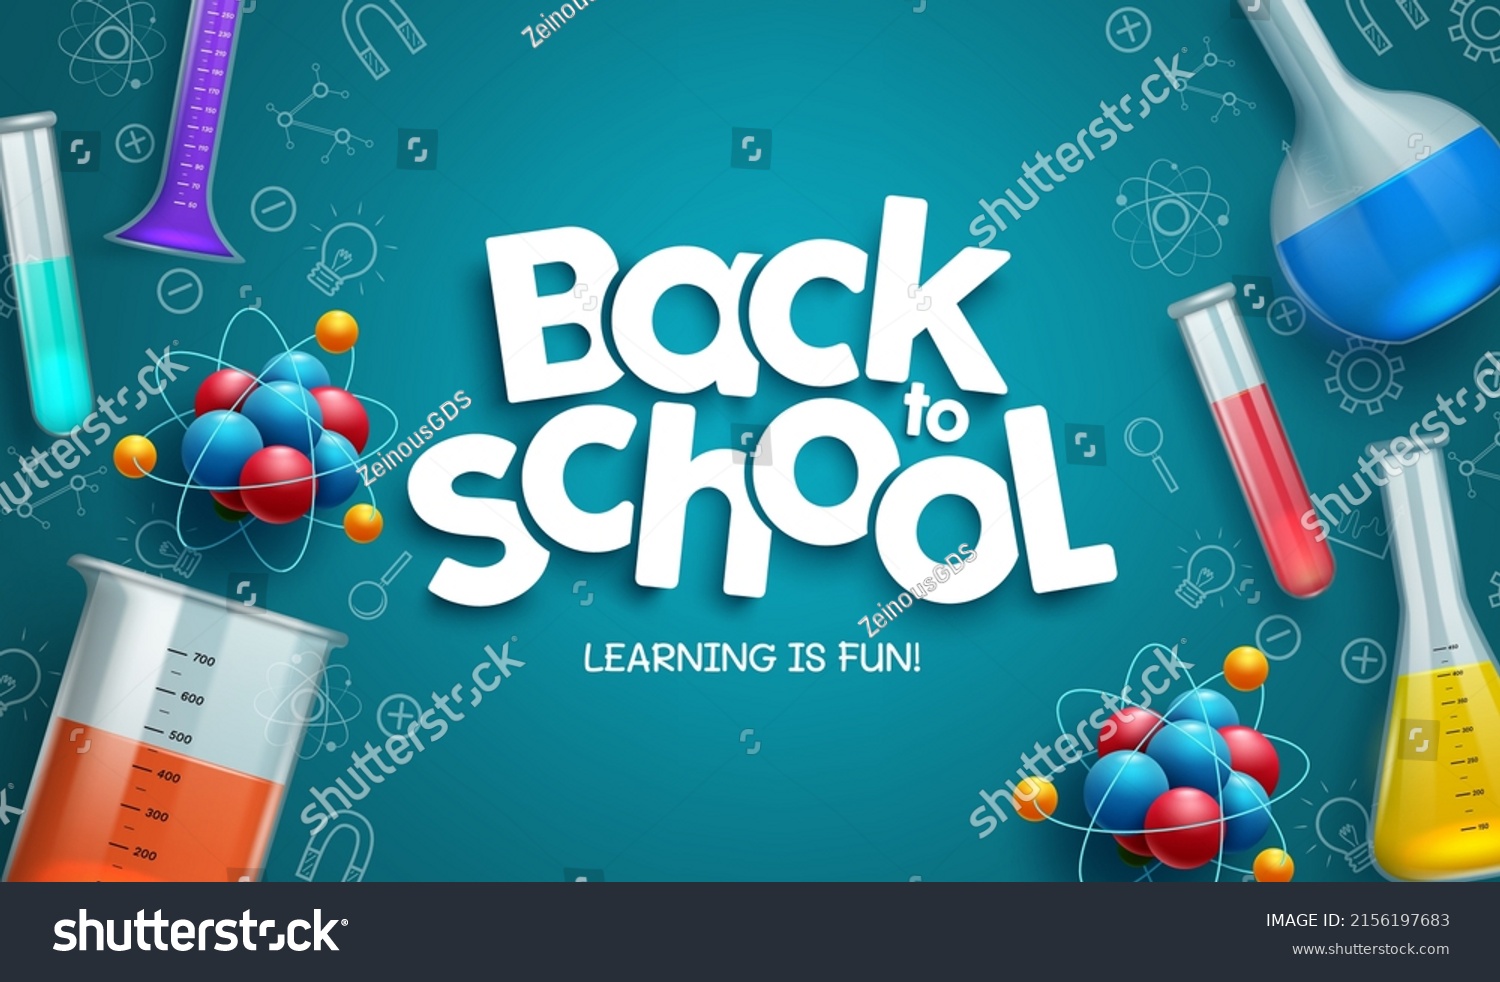 Back to school vector background design. Back to school text with science laboratory elements and knowledge icon in chalkboard for educational lab learning experiment . Vector illustration.
 #2156197683